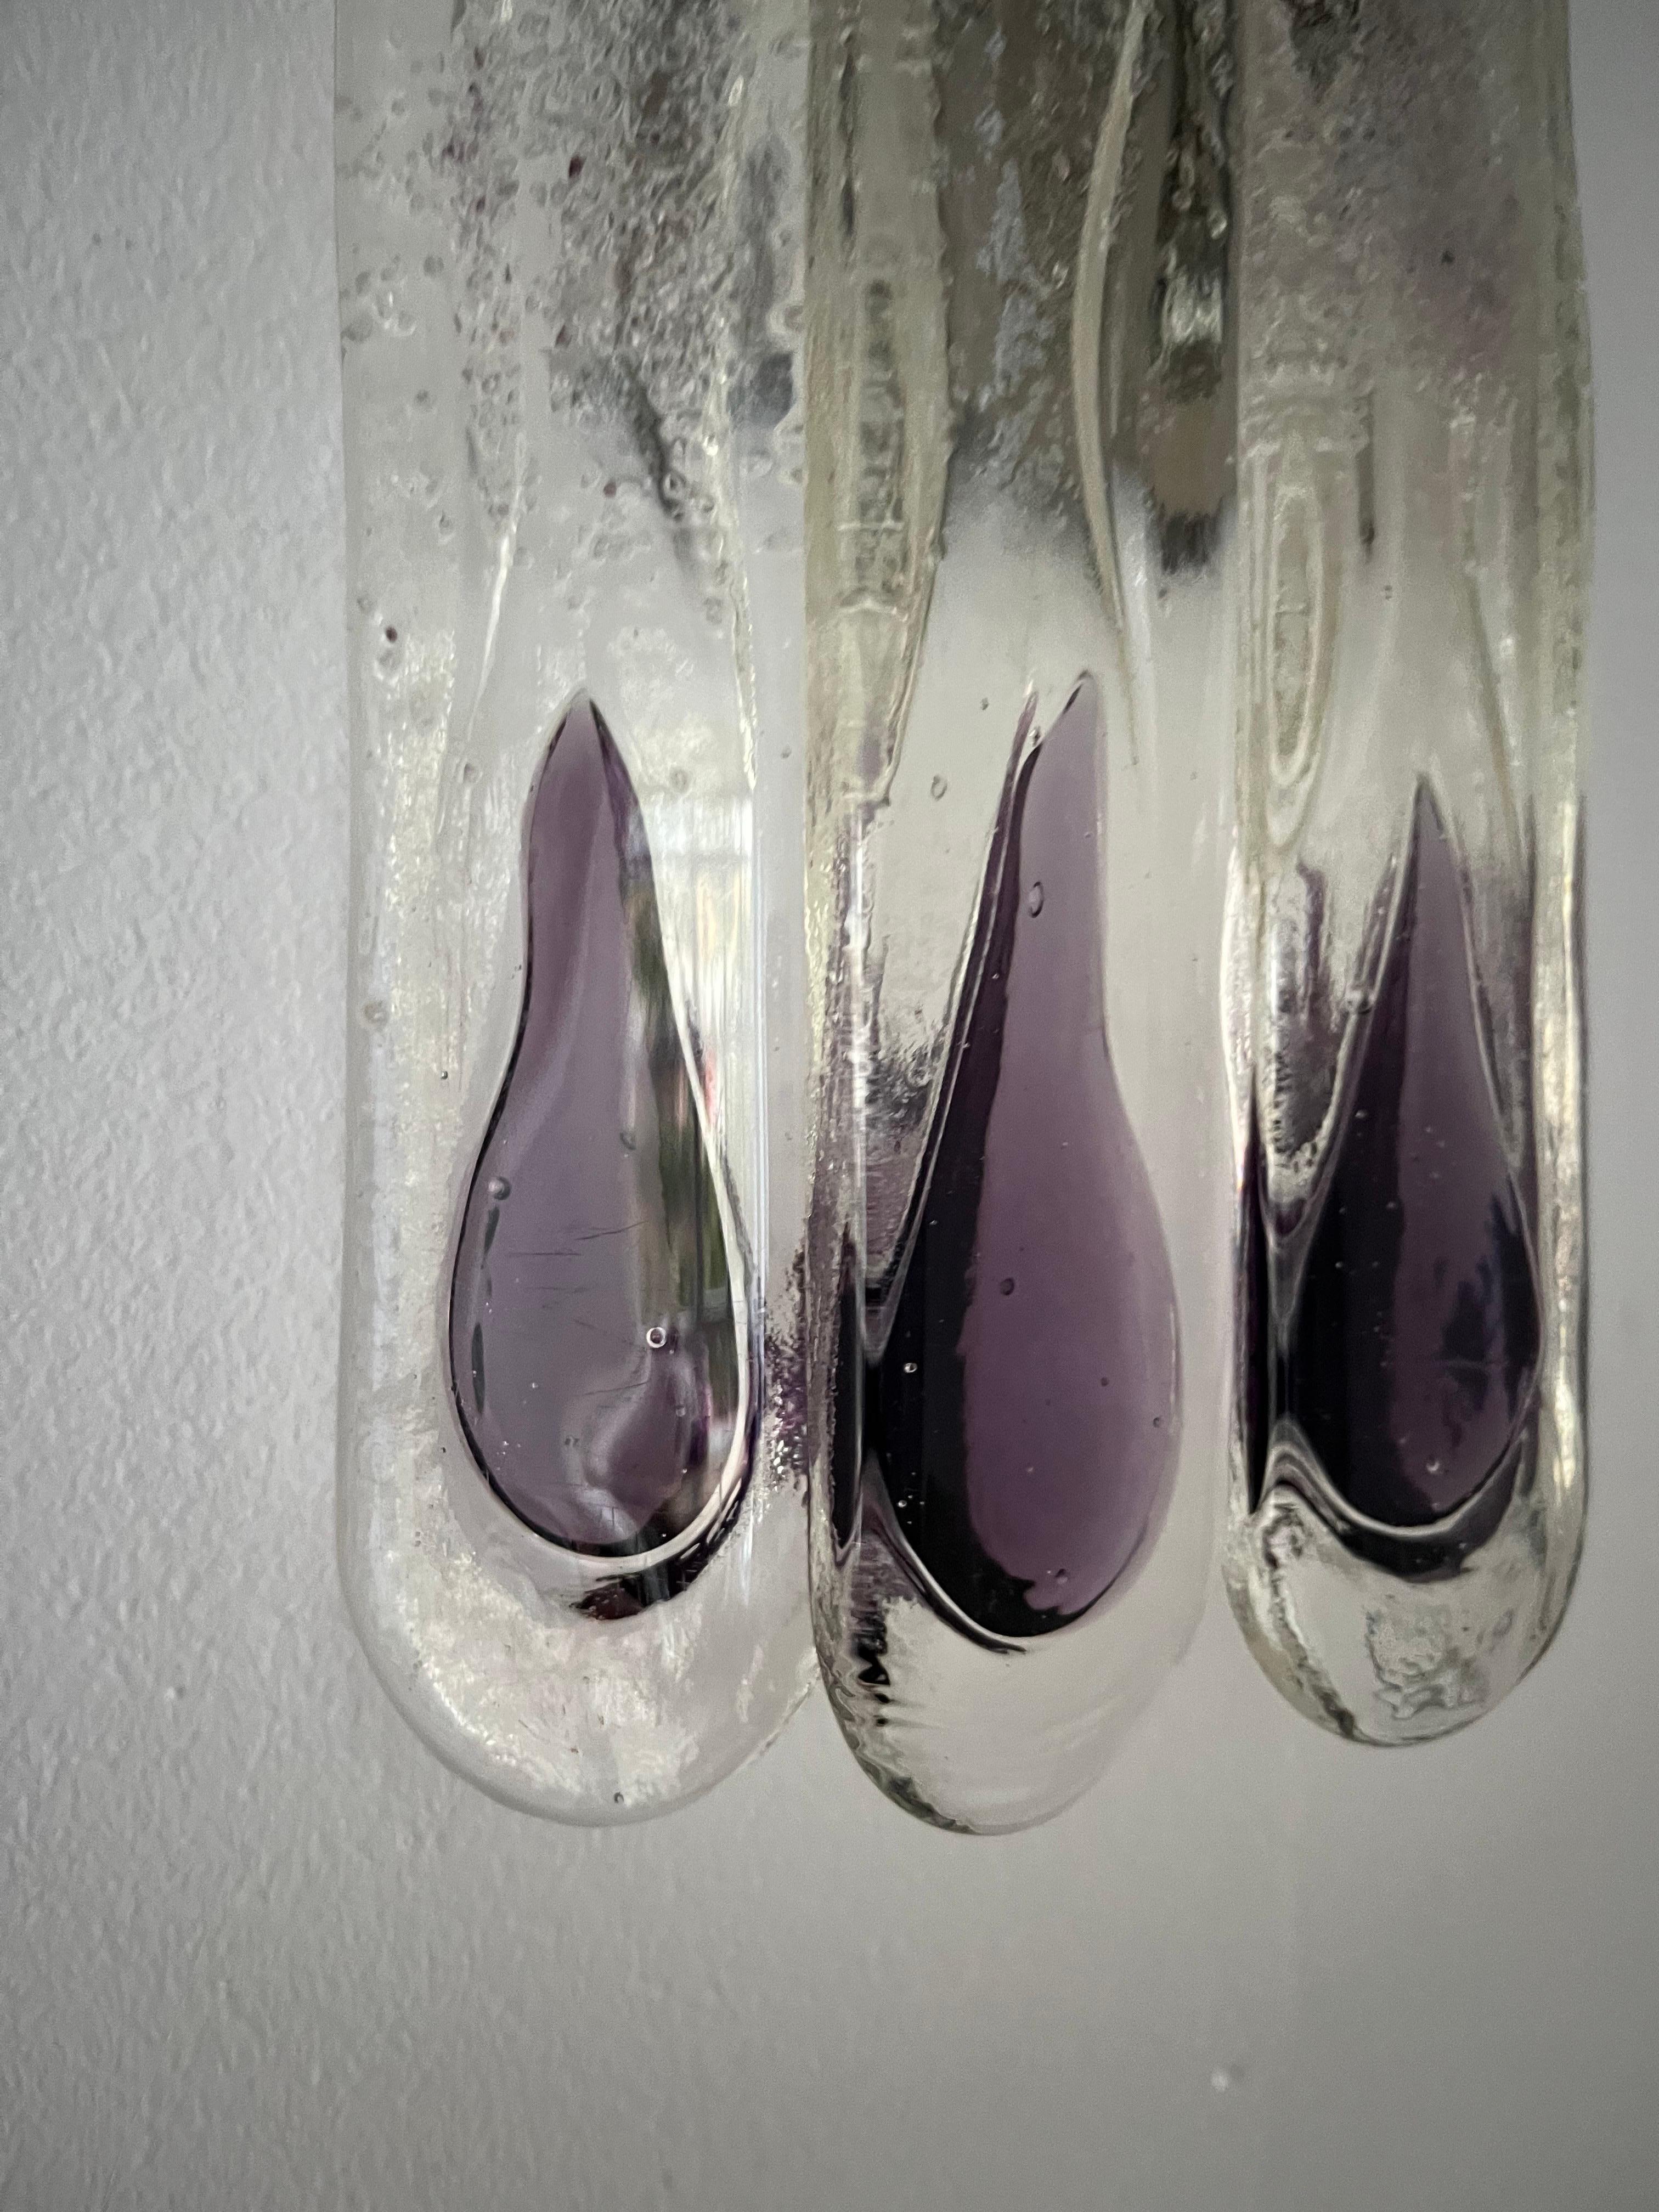 Mid-Century Modern Italian Mid-Century Set of Four Lilac Murano Wall Sconces by Mazzega, 1970s For Sale